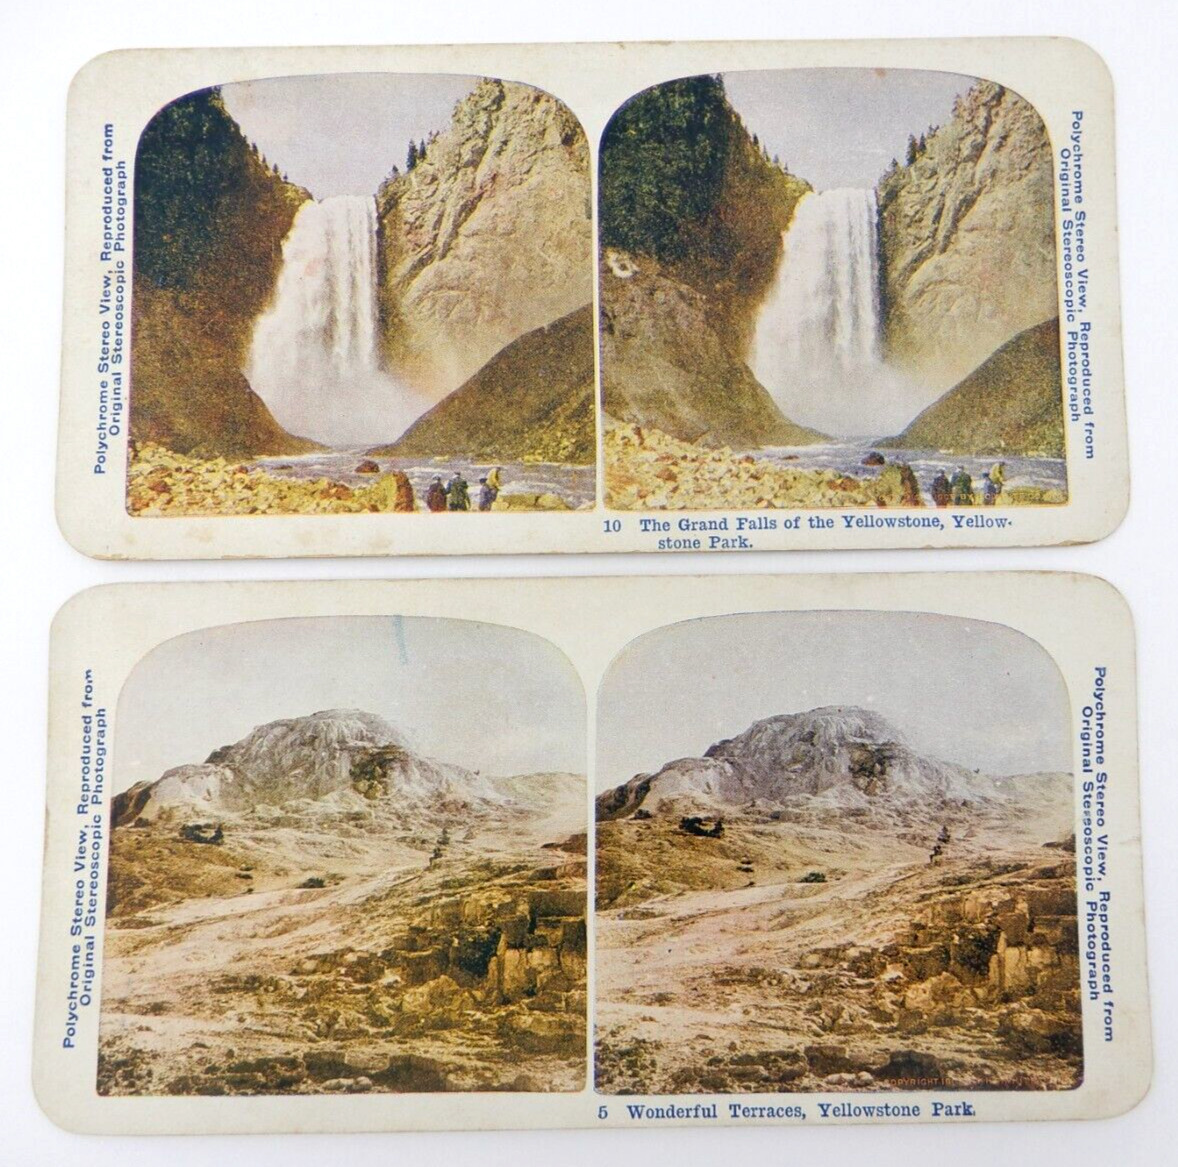 2 ANTIQUE STEREOSCOPE CARDS OF YELLOWSTONE PARK: TERRACES & THE GRAND FALLS